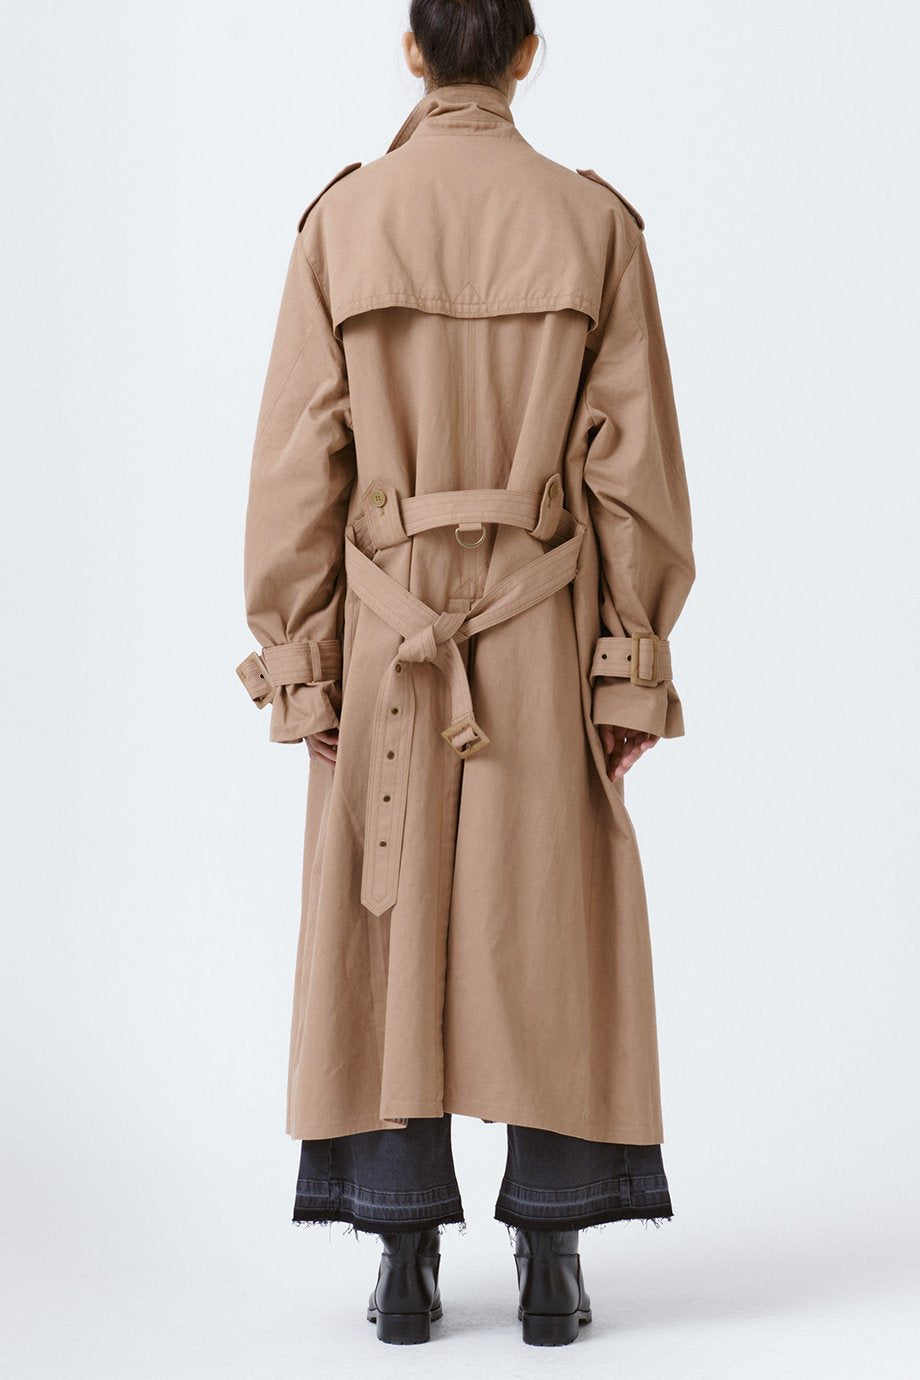 Munthe Rolo Trench - Camel